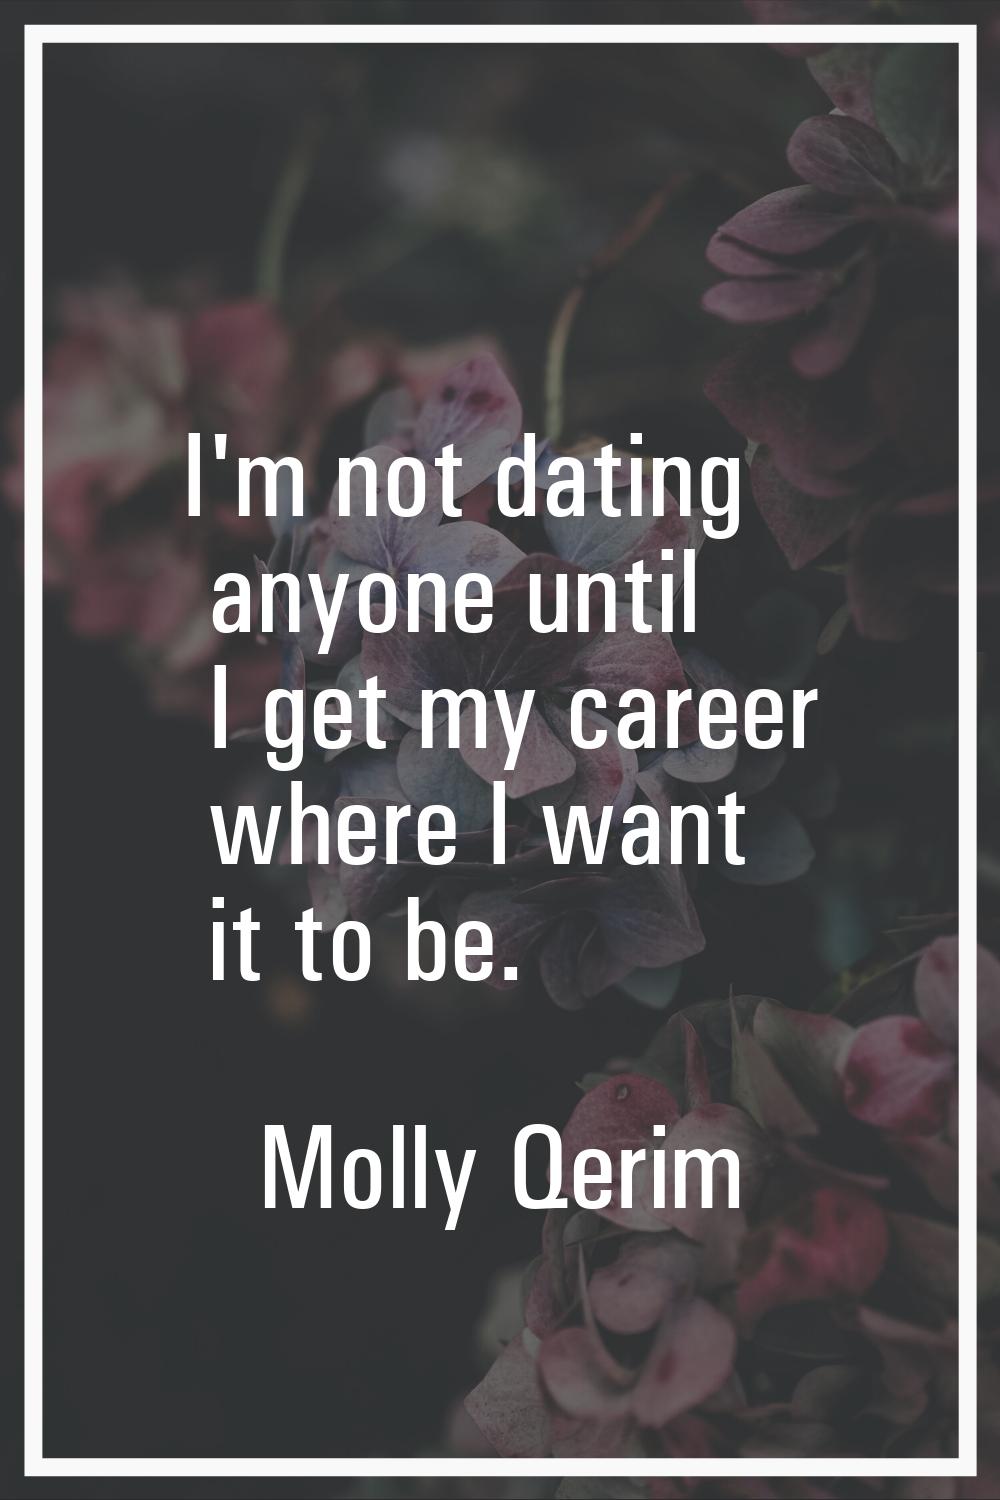 I'm not dating anyone until I get my career where I want it to be.